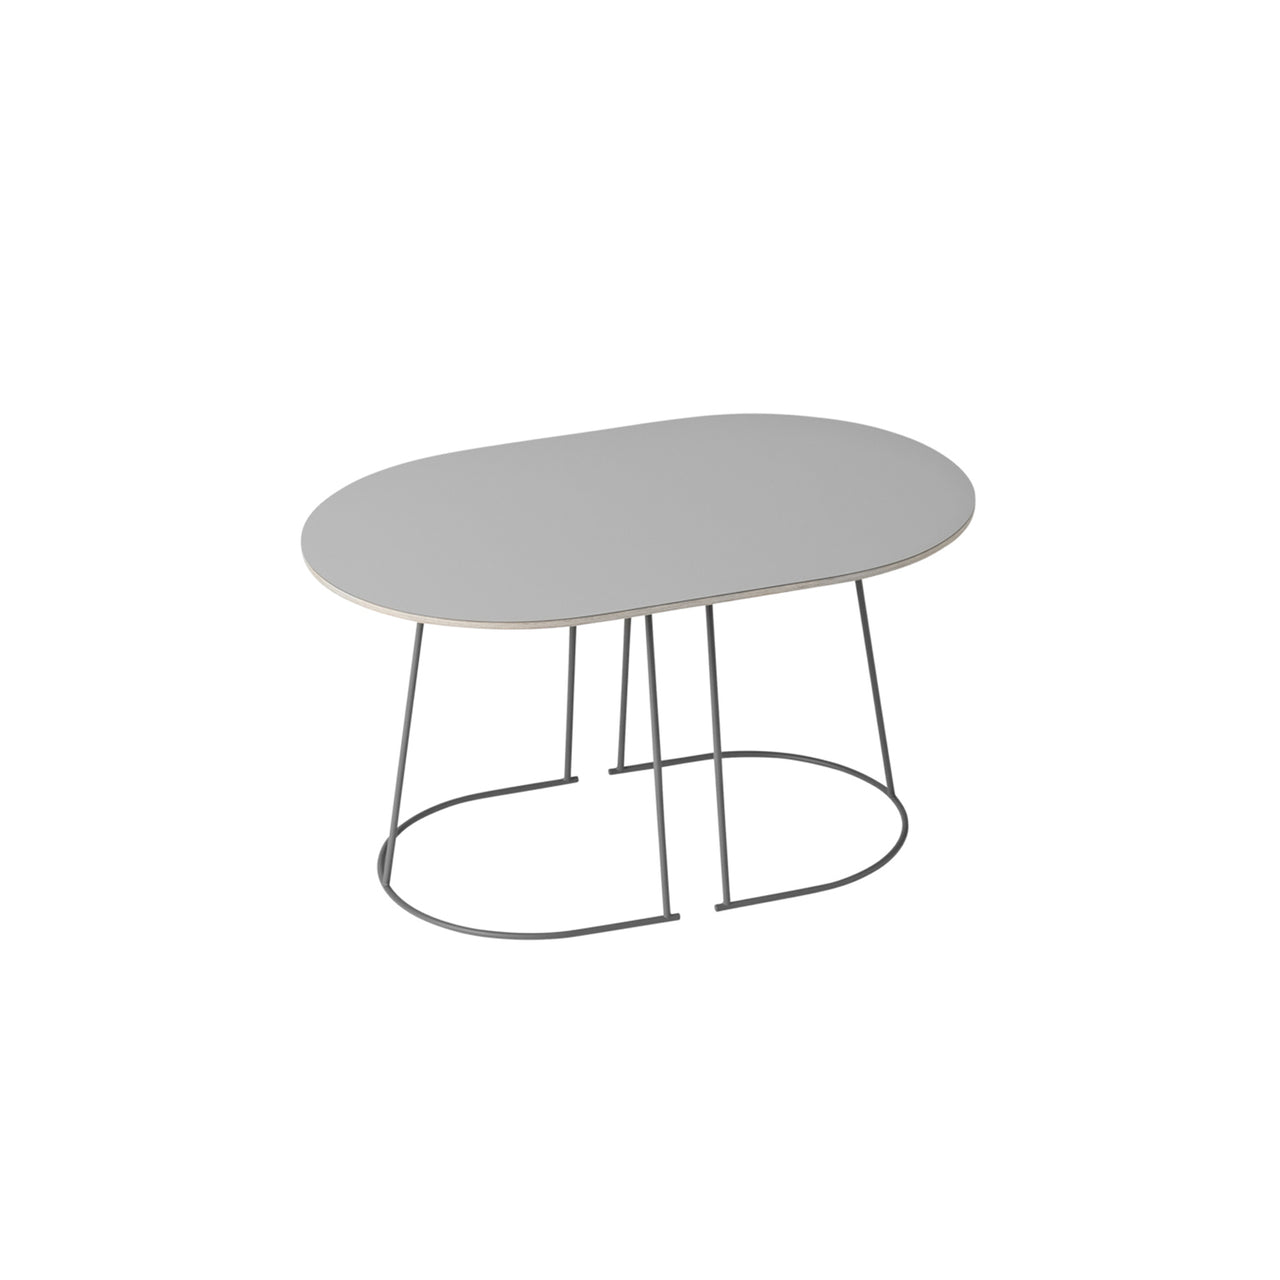 Airy Coffee Table: Small - 26.8